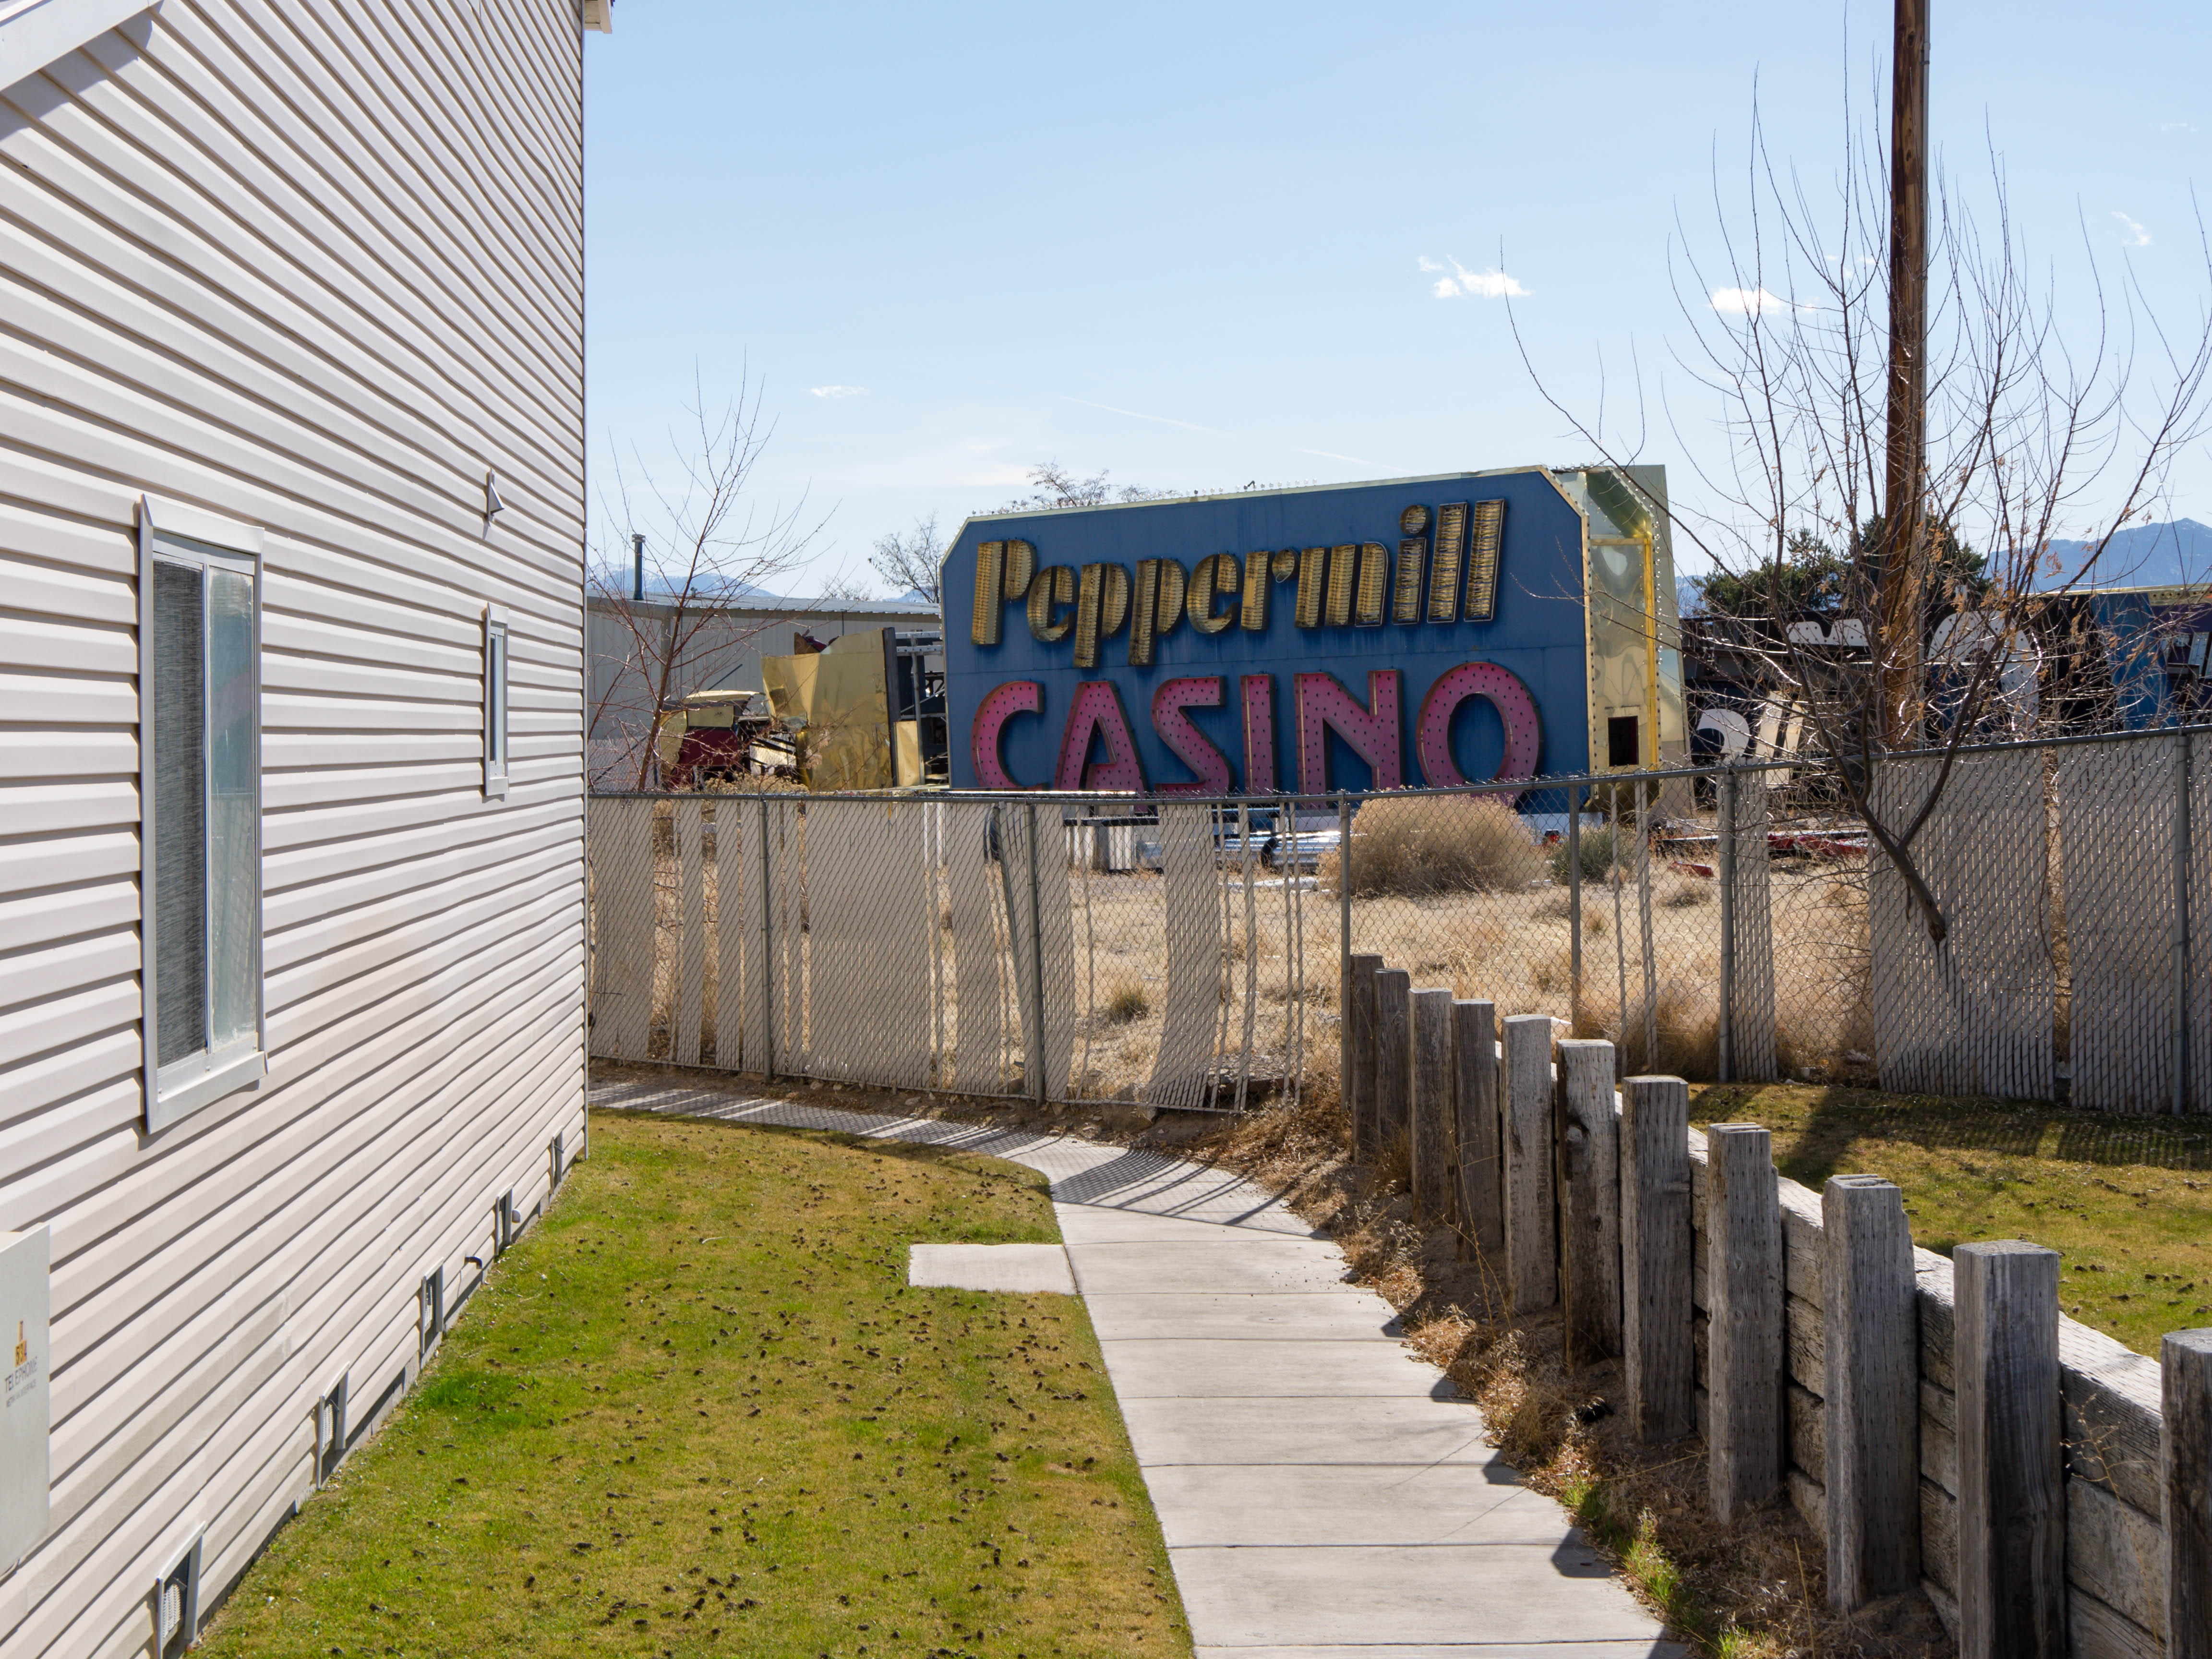 WENDOVER #04 - The Peppermill